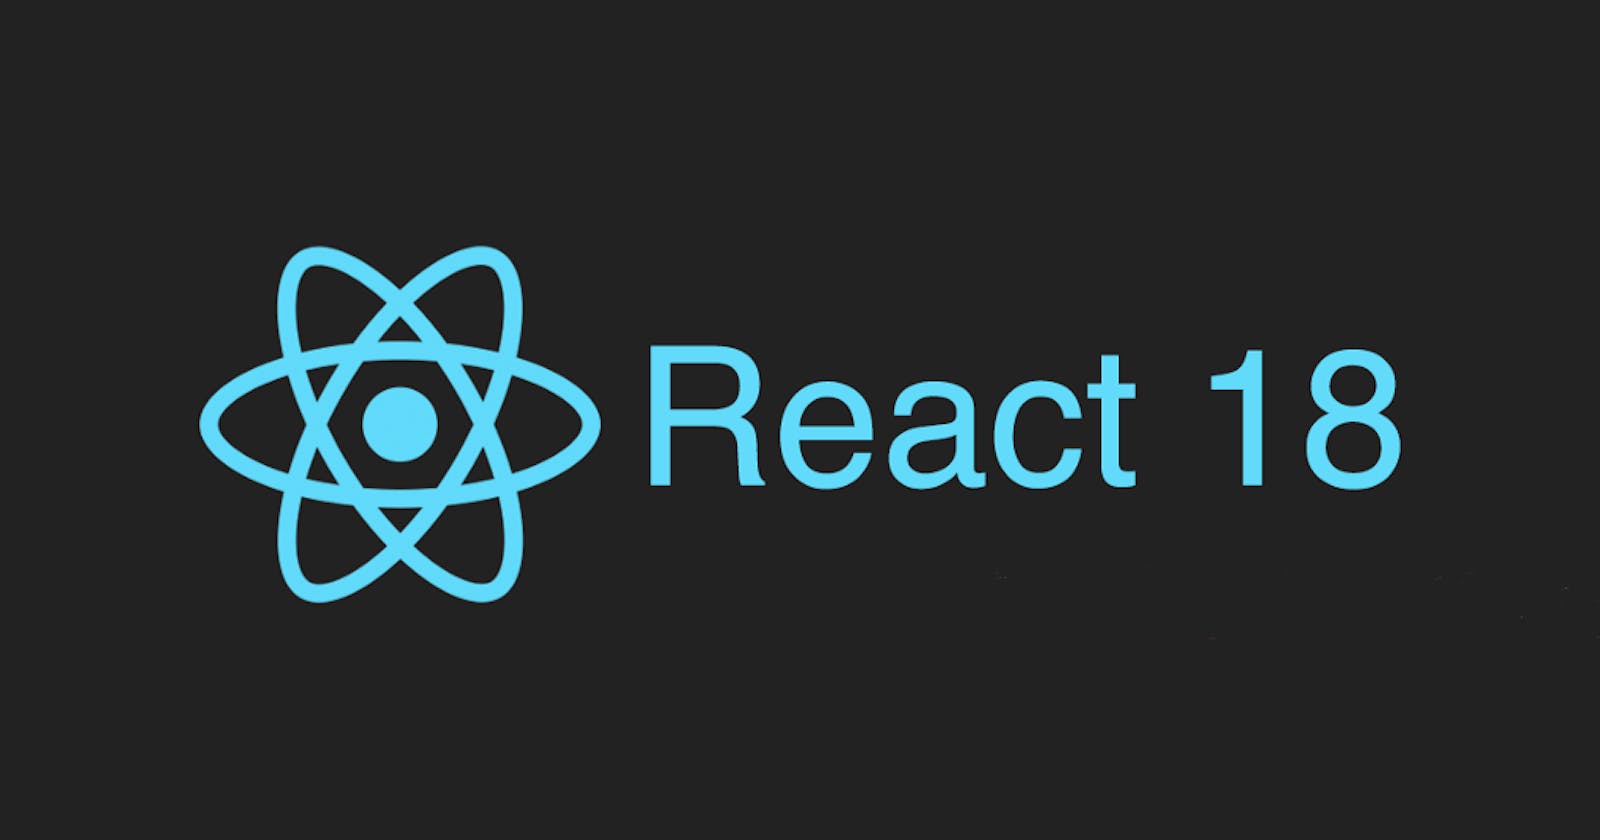 Starting with React 18